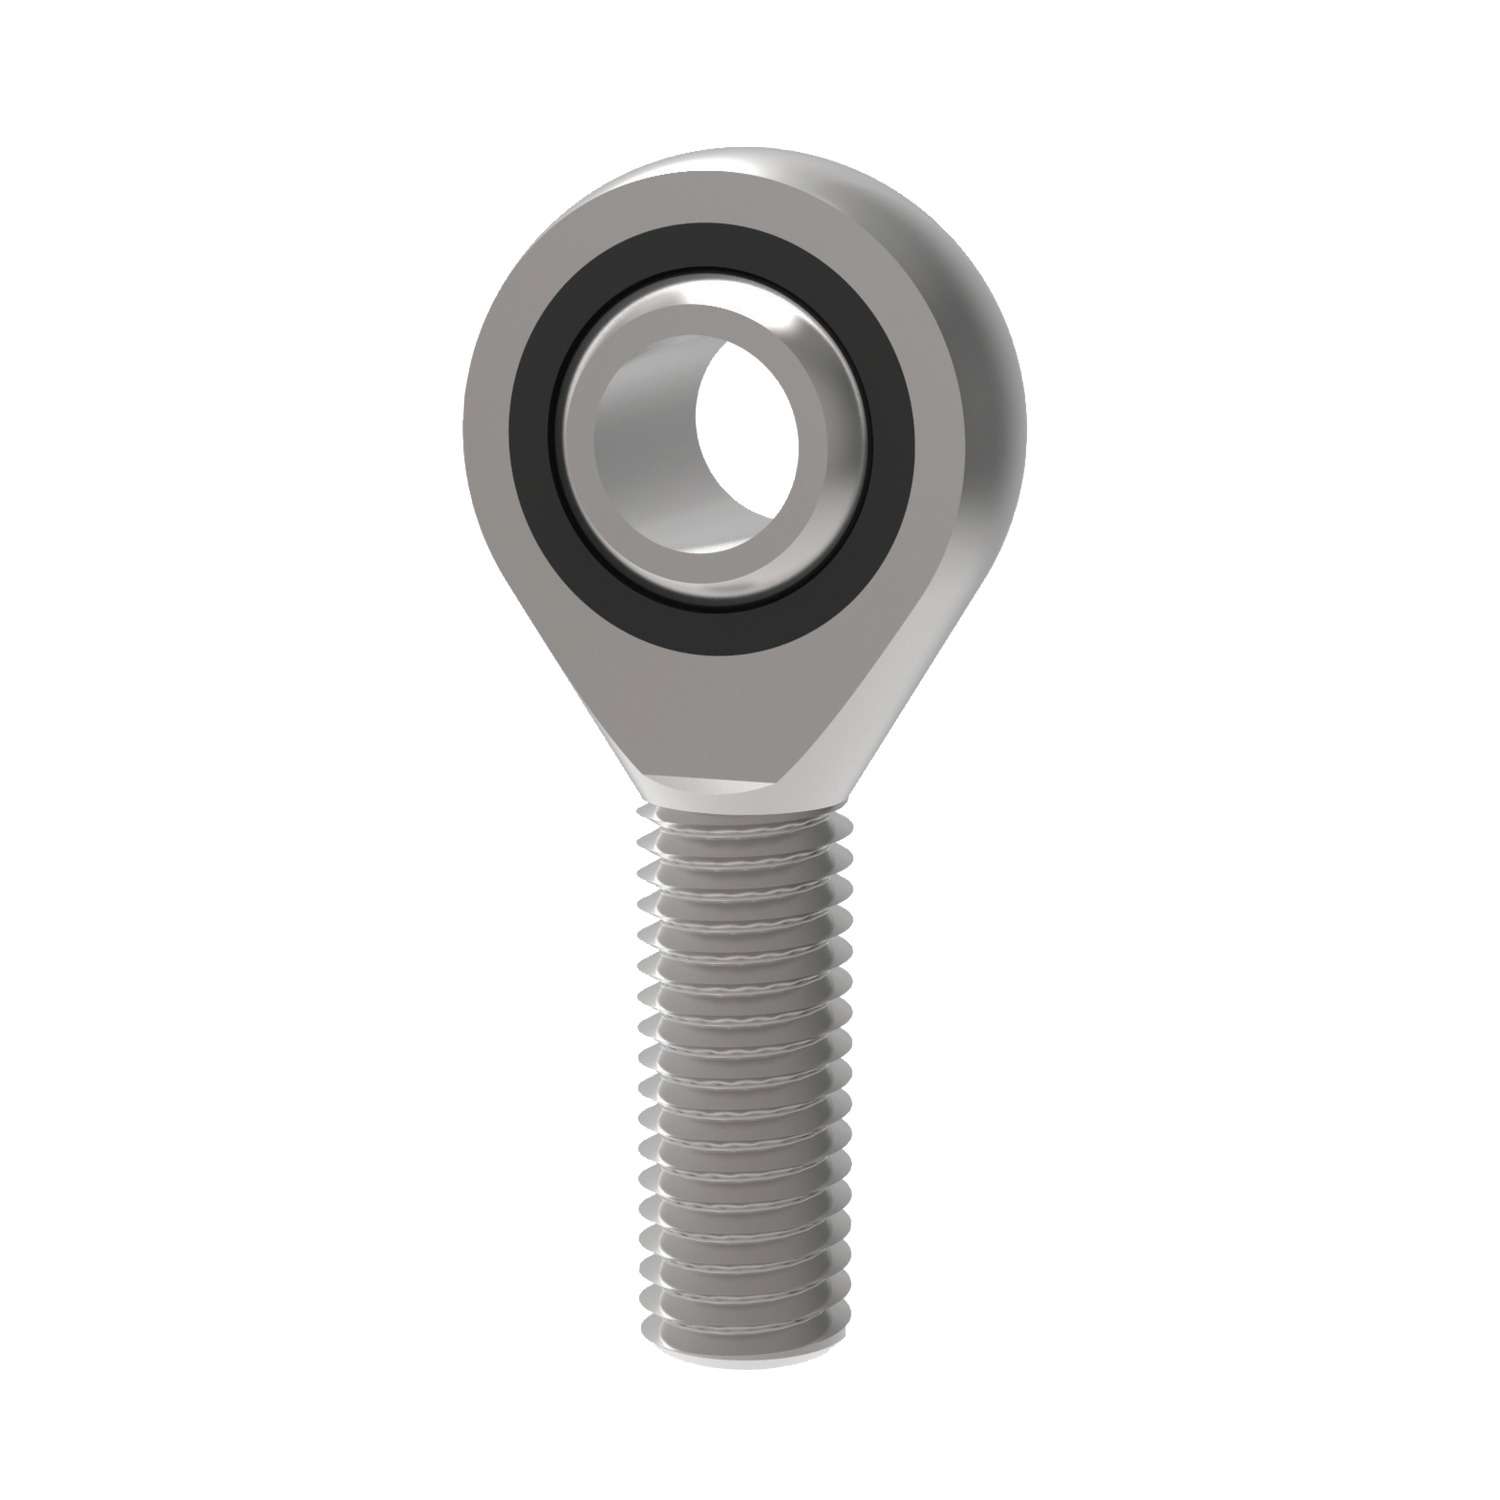 Low Cost Rod End - Male Economy male rod end E series, Zinc plated steel.